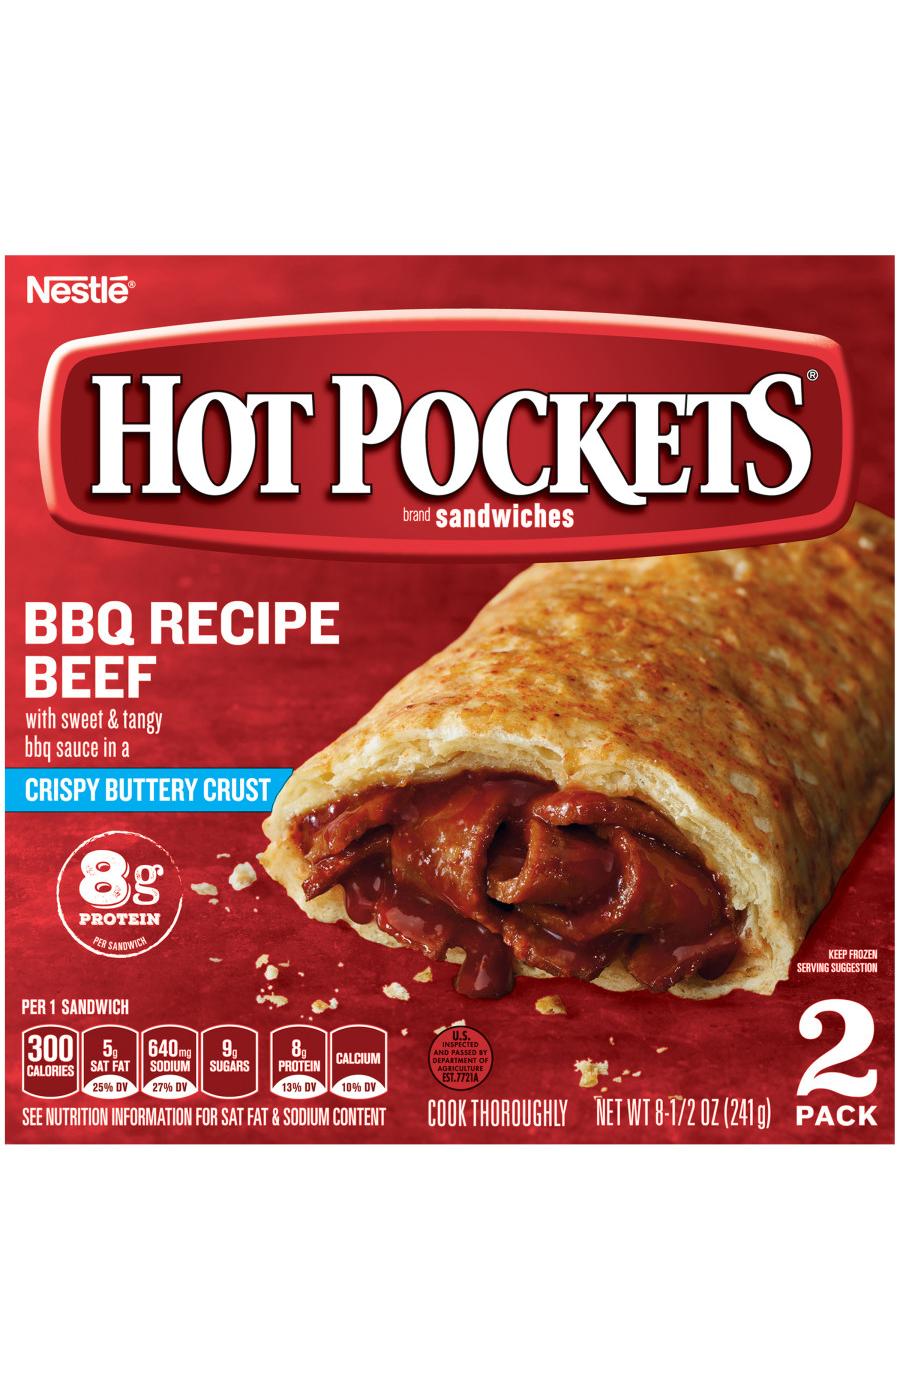 Hot Pockets BBQ Recipe Beef Crispy Buttery Crust Frozen Sandwiches; image 1 of 5